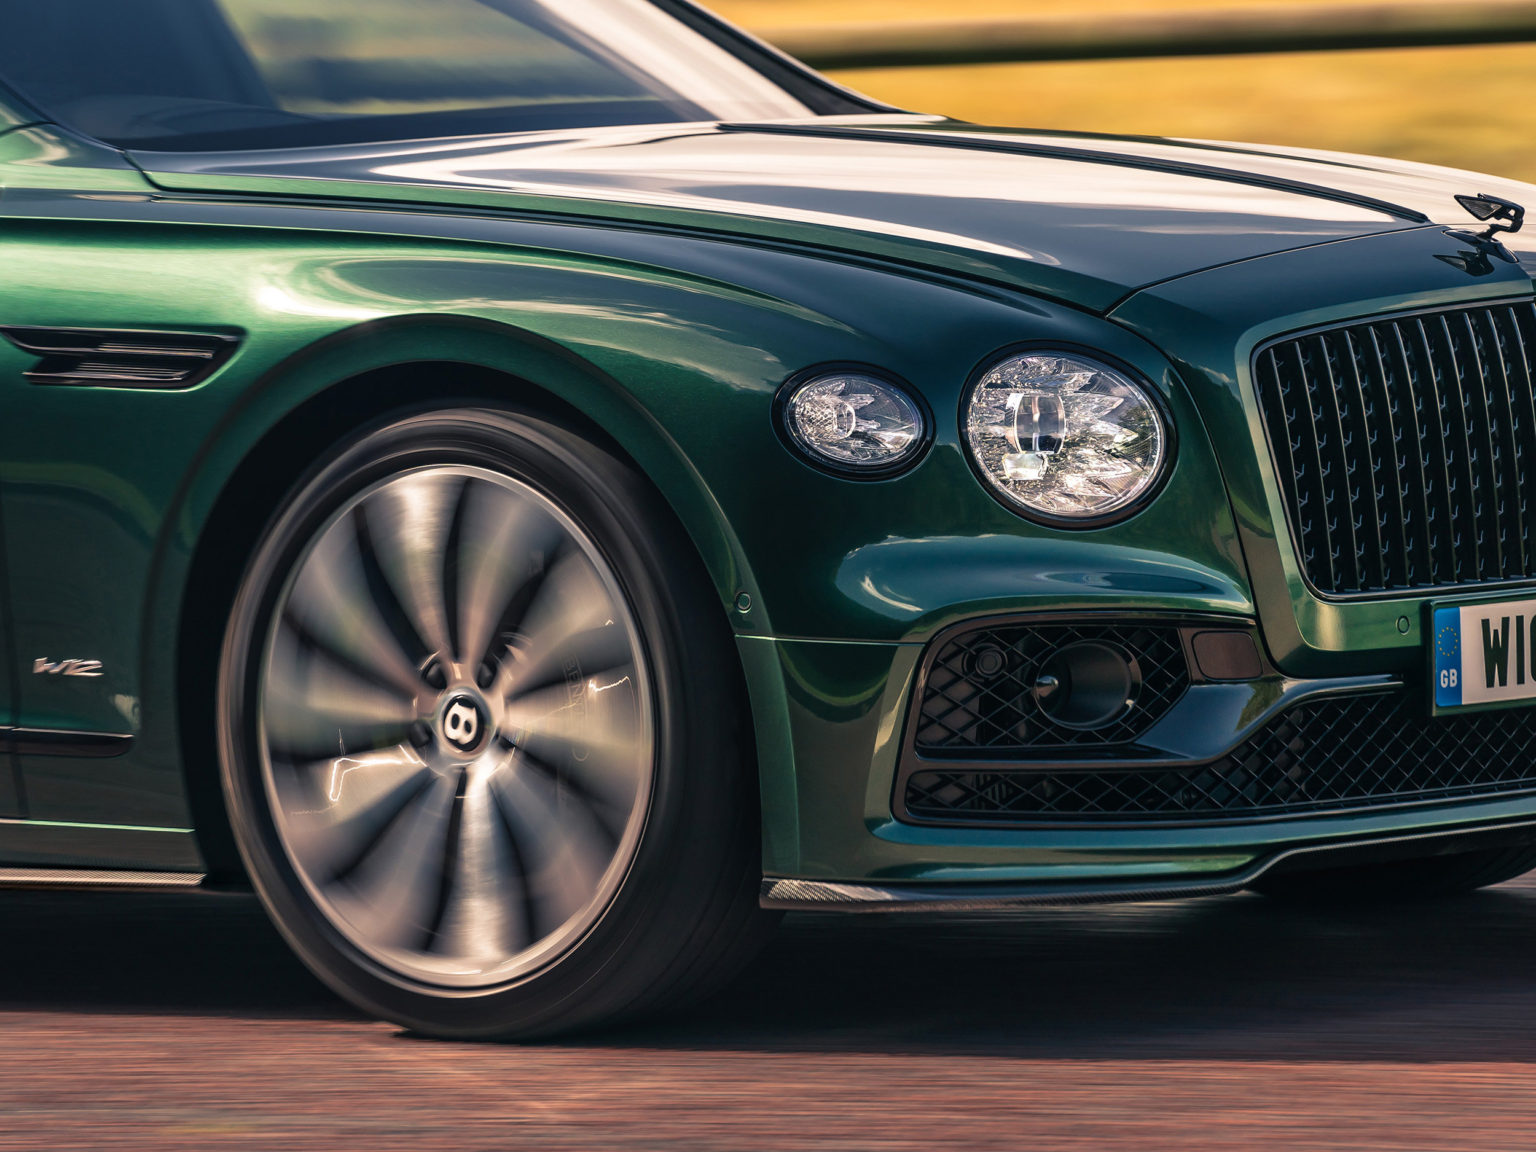 The Bentley Flying Spur is available in a new specification for the new model year.